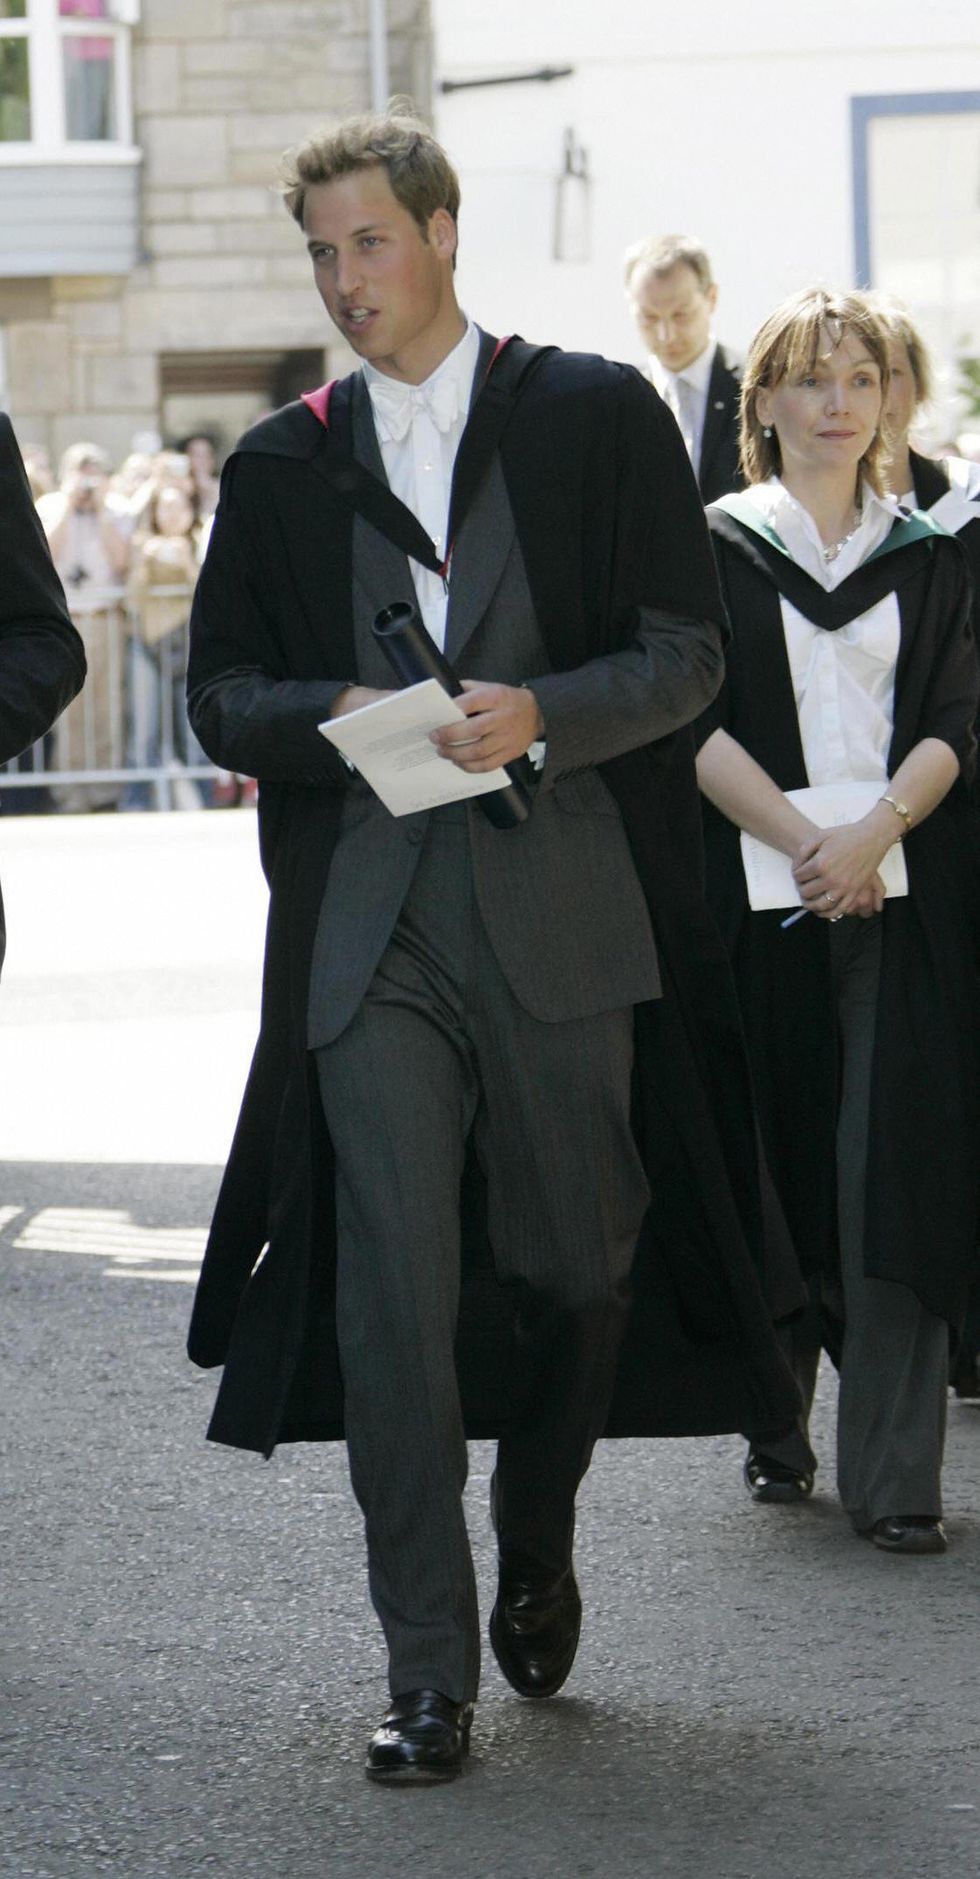 prince william after his graduation cere